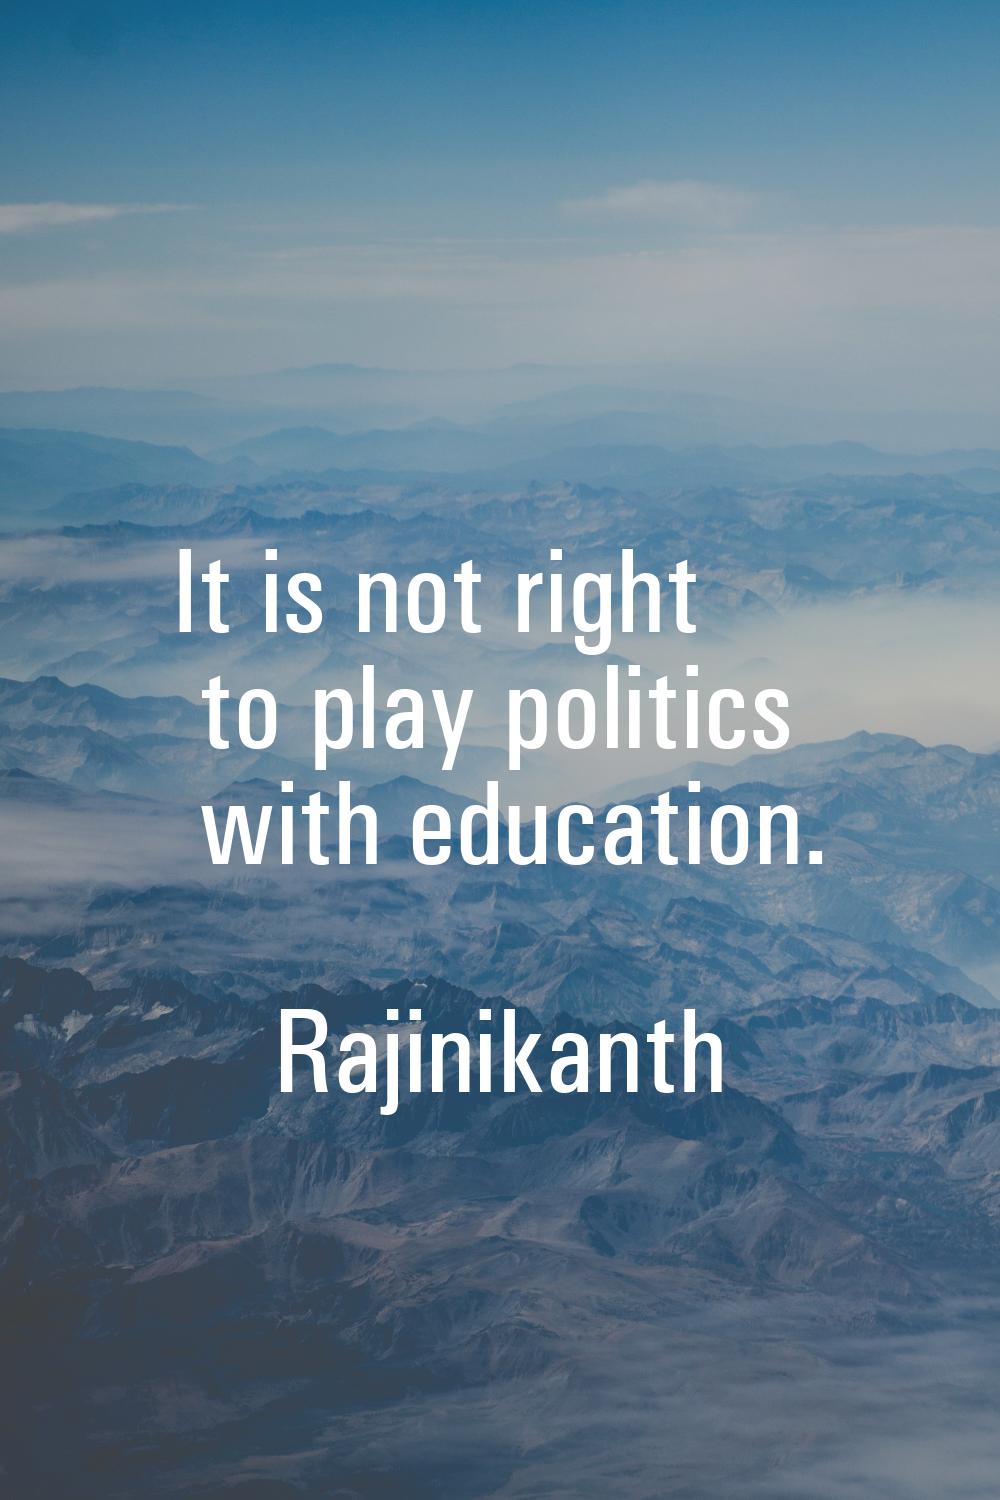 It is not right to play politics with education.